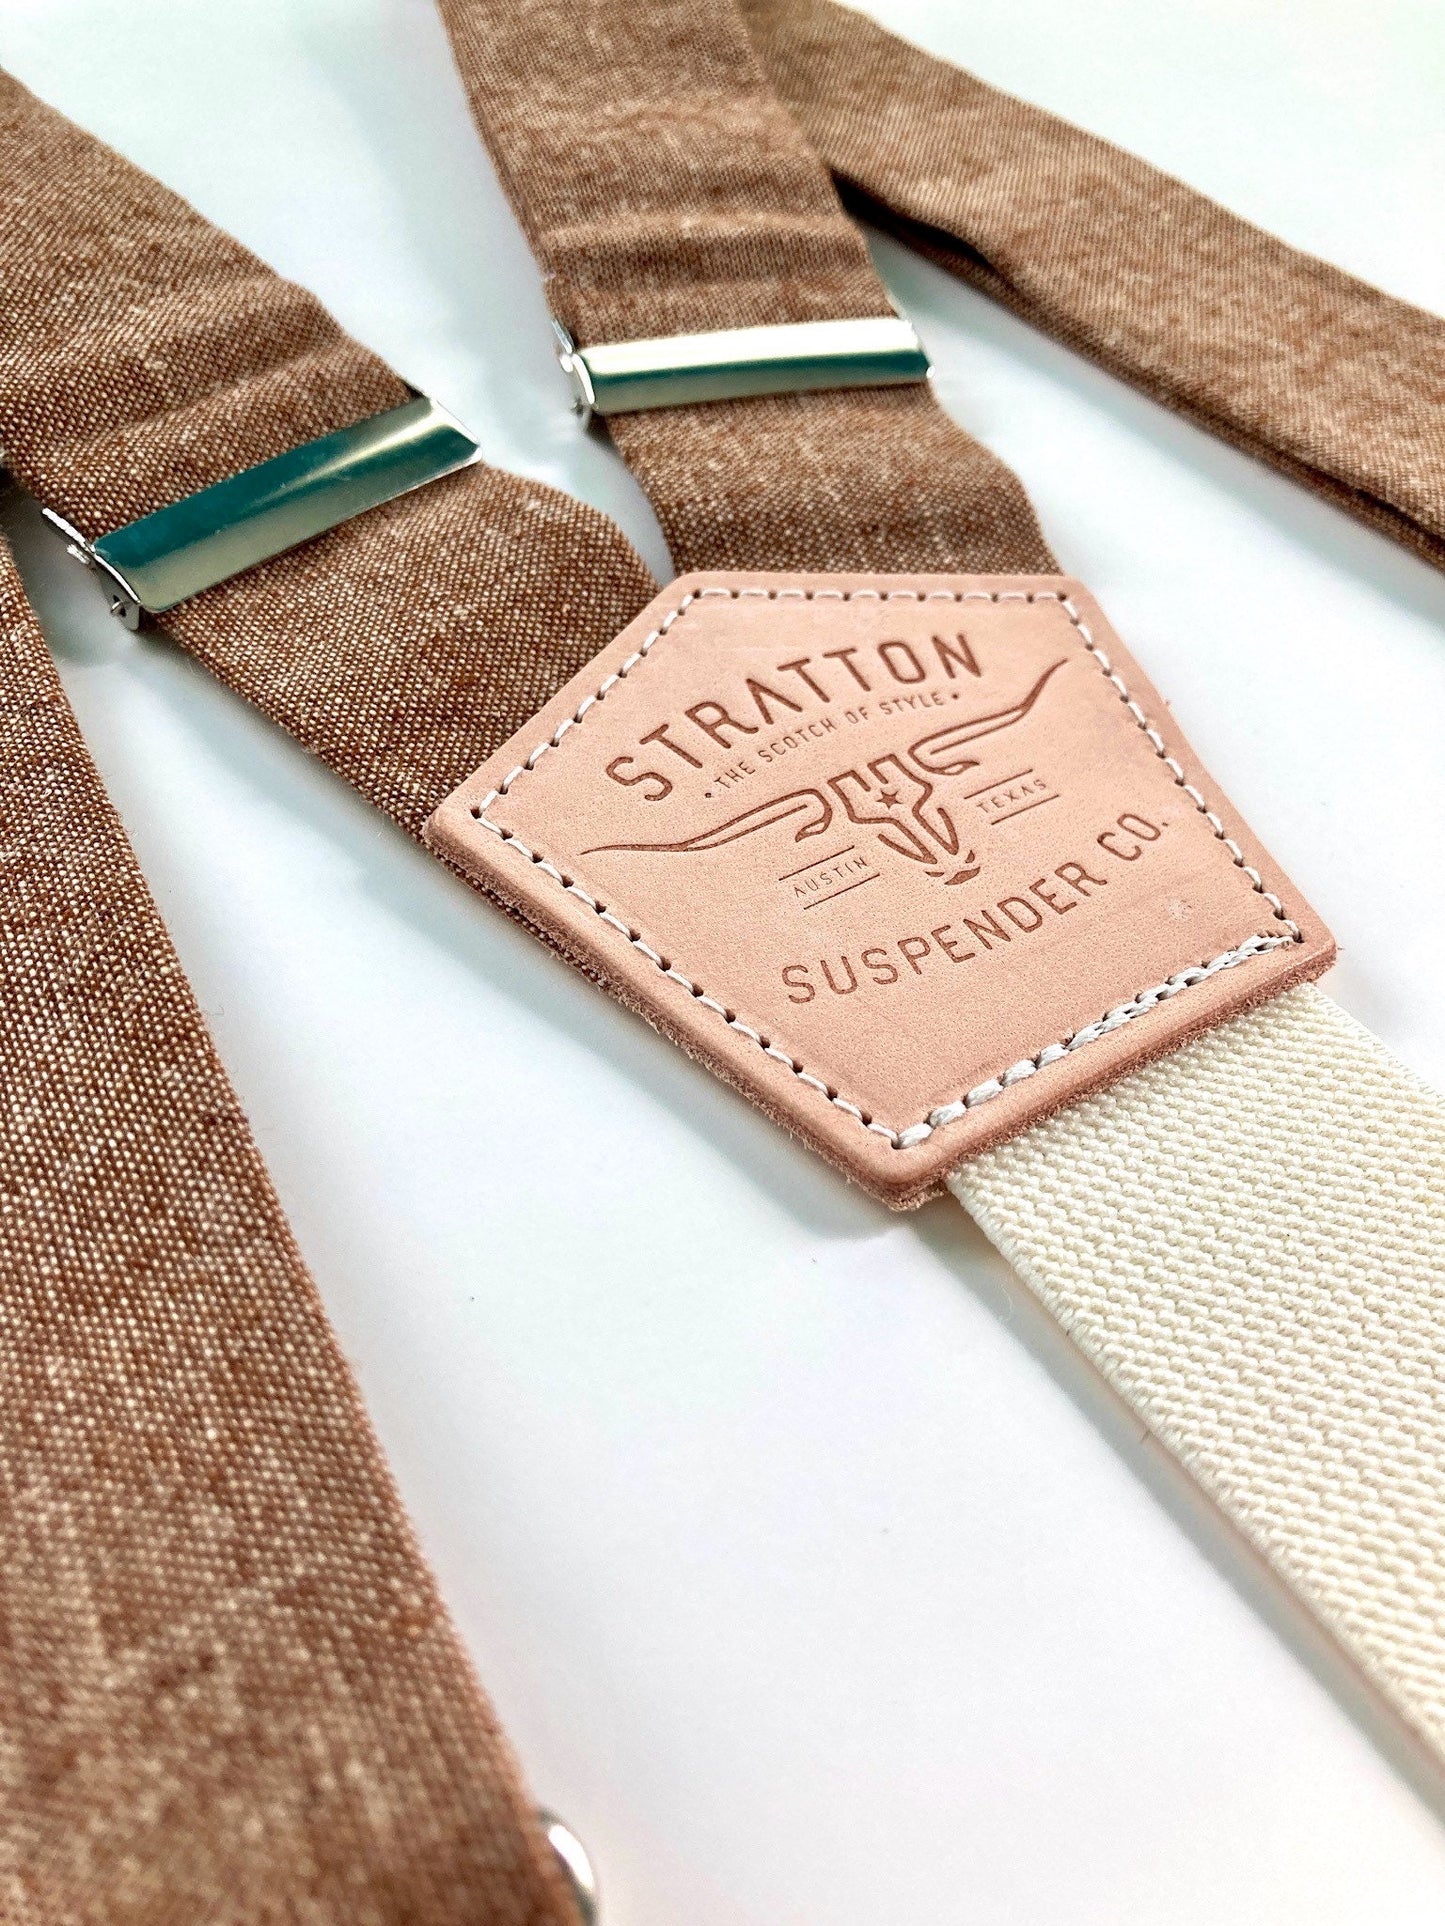 Stratton Suspender Co. feature the new fall collection suspenders in Nutmeg (brown) linen stitched onto vegtan shoulder leather with cream colored elastic